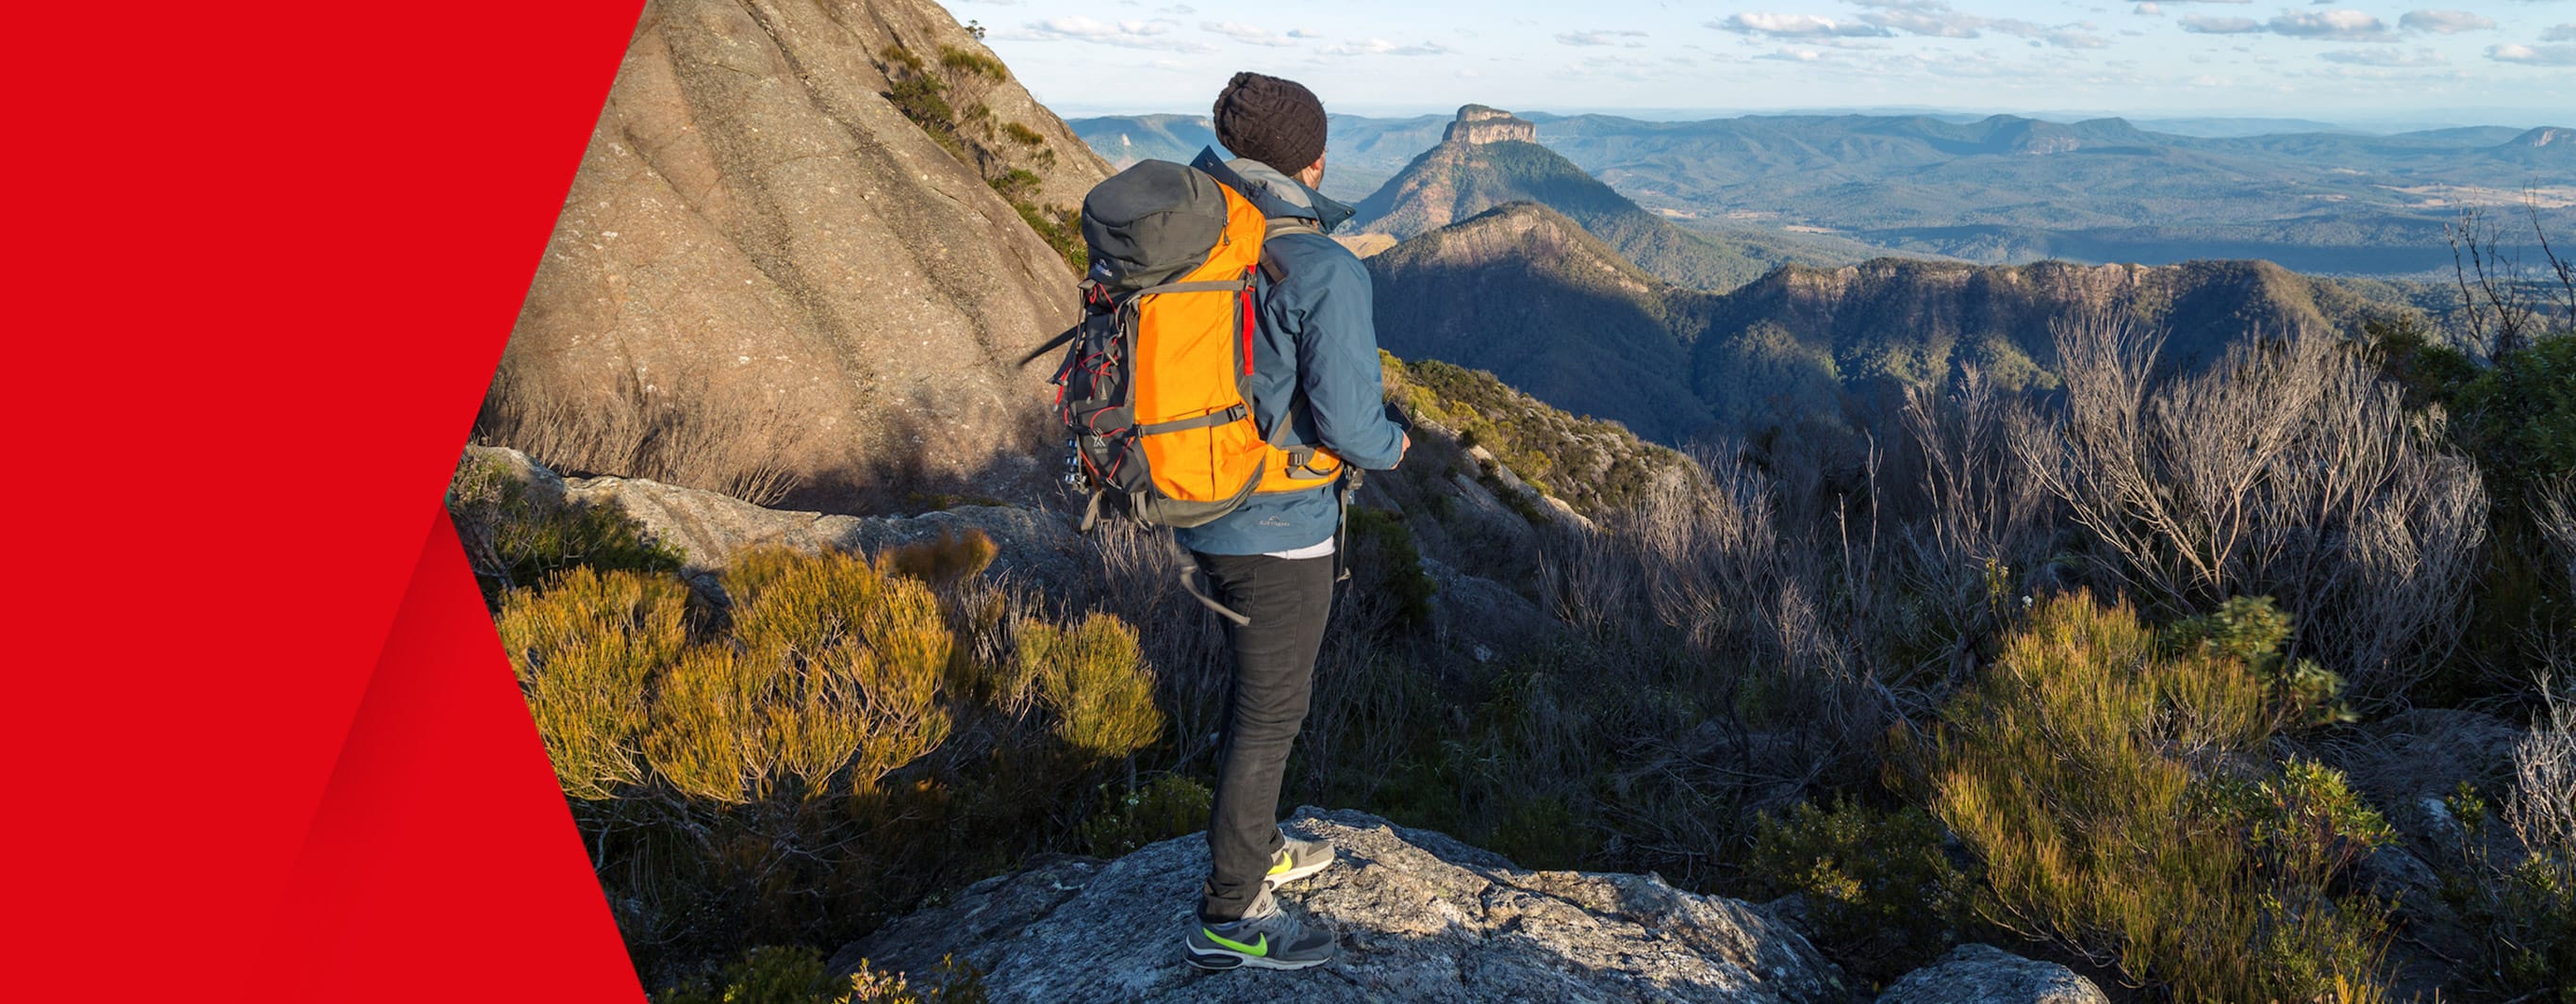 A man in warm hiking gear and backpack stands on a rock overlooking a bushy mountainous range far in to the distance